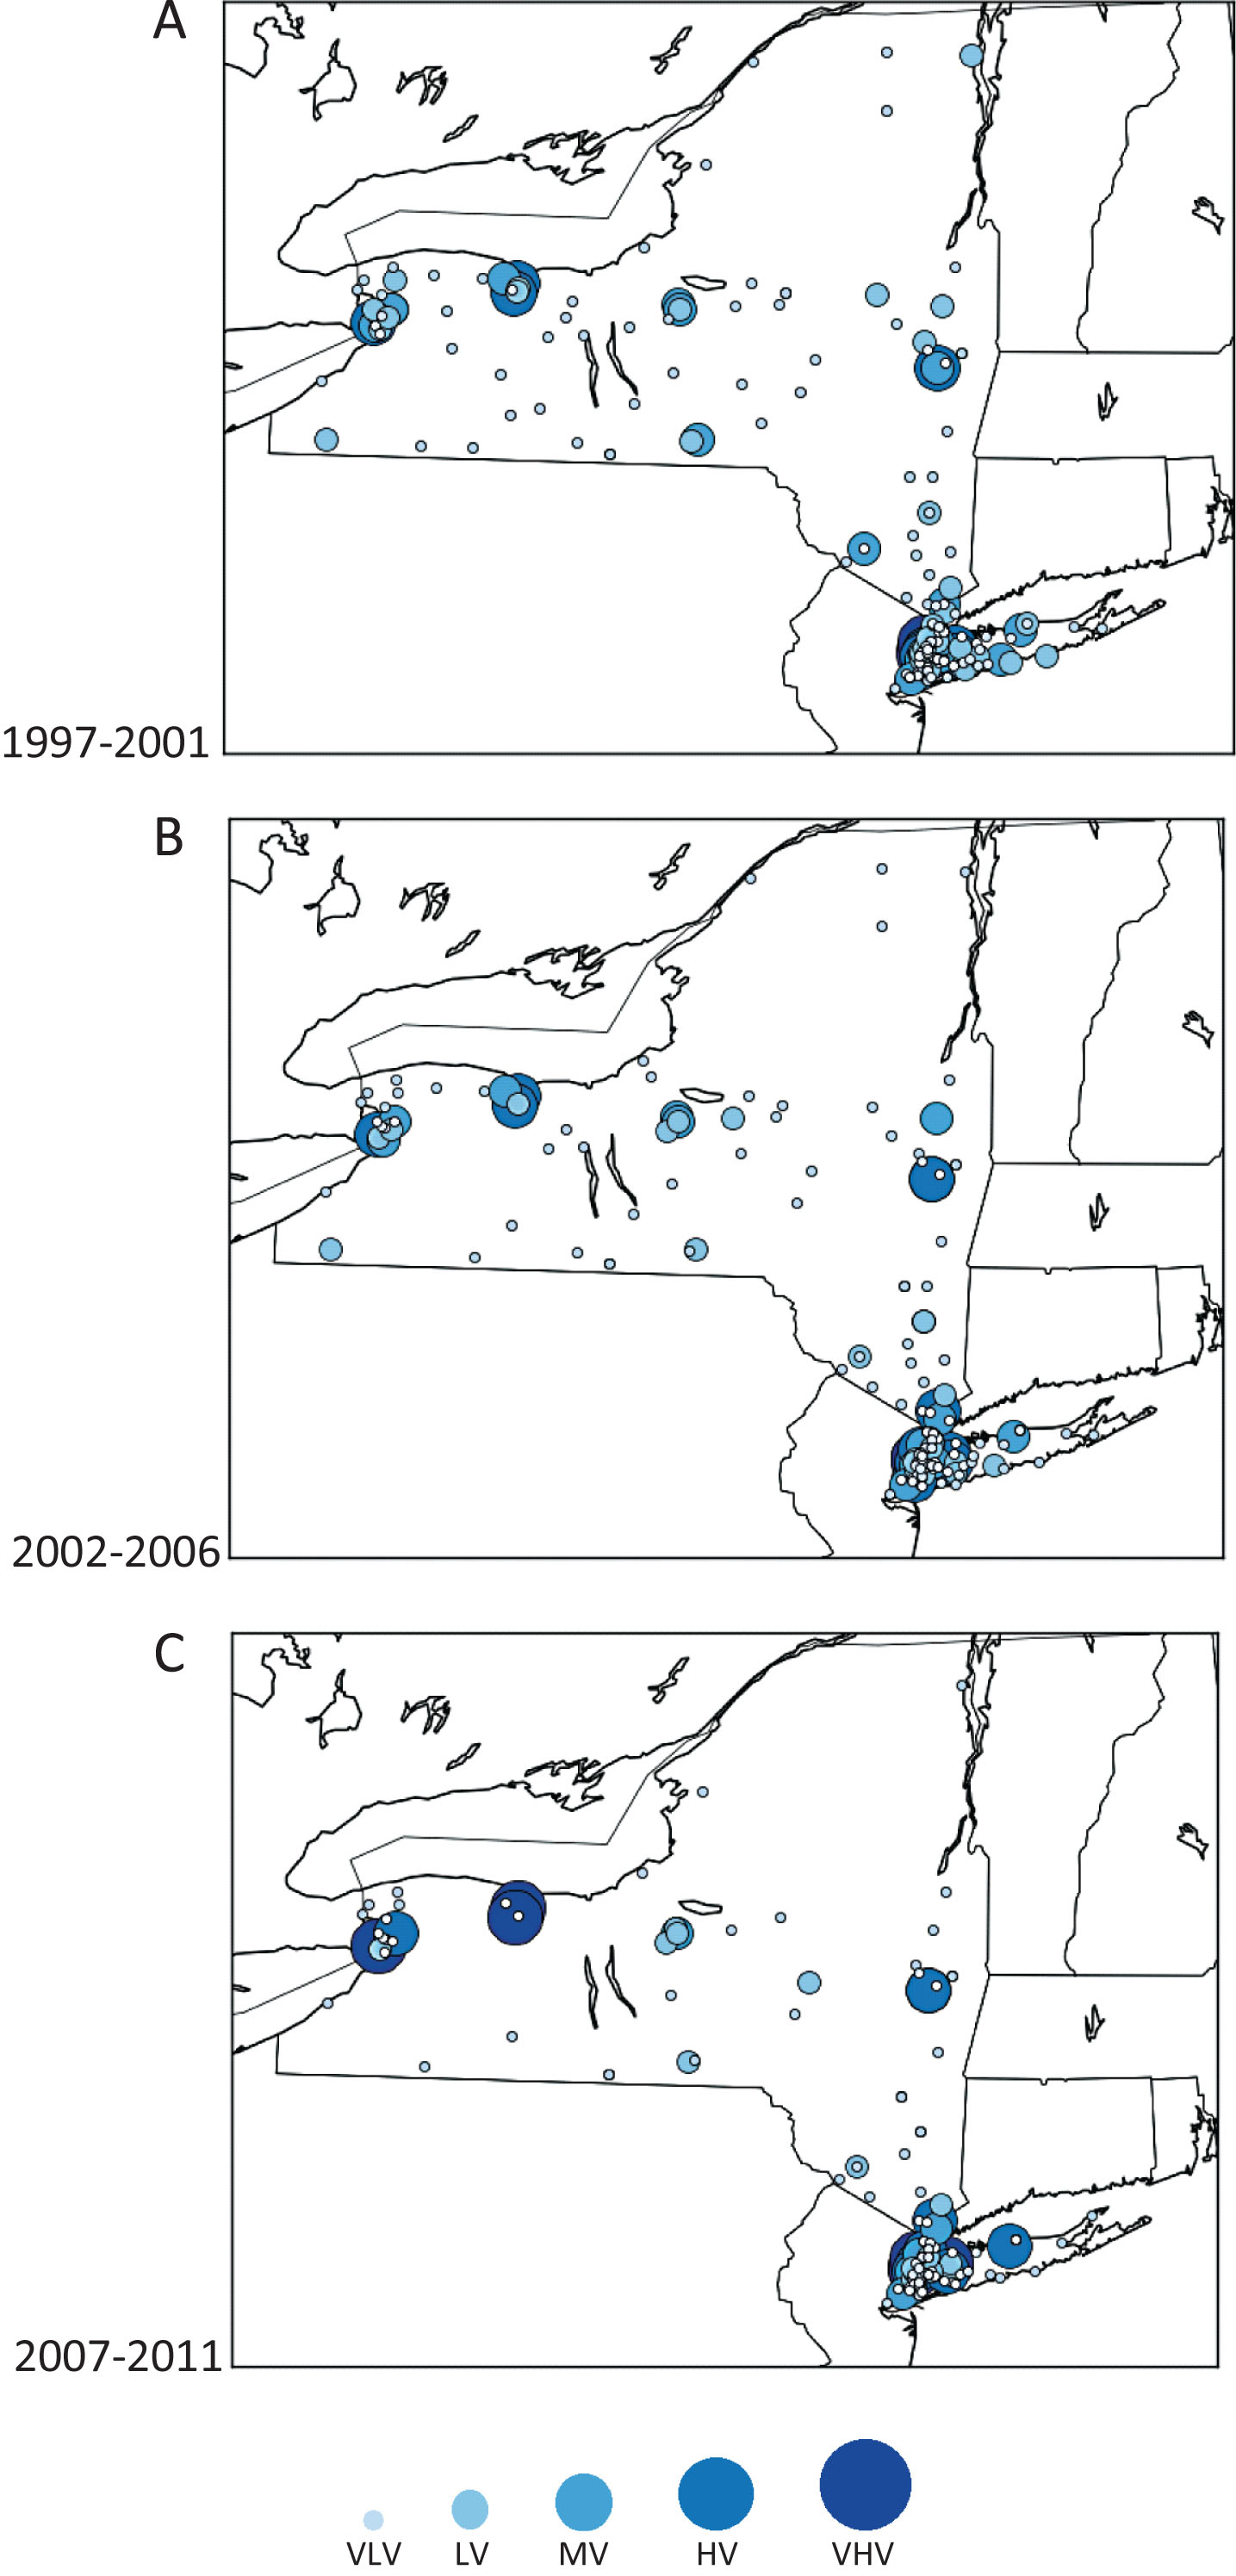 Geographic distribution of cystectomy facilities in New York State by ZIP code over time. Each bubble represents a single cystectomy hospital with bubble size correlating to volume status. (A) 1997–2001, (B) 2002–2006, (C) 2007–2011. Key: VLV (very low volume) hospital: ≤2.6 cystectomies per year. LV (low volume) hospital: 2.7–5 cystectomies per year. MV (medium volume) hospital: 5.1–10 cystectomies per year. HV (high volume) hospital: 10.1–27.2 cystectomies per year. VHV (very high volume) hospital: ≥27.3 cystectomies per year.